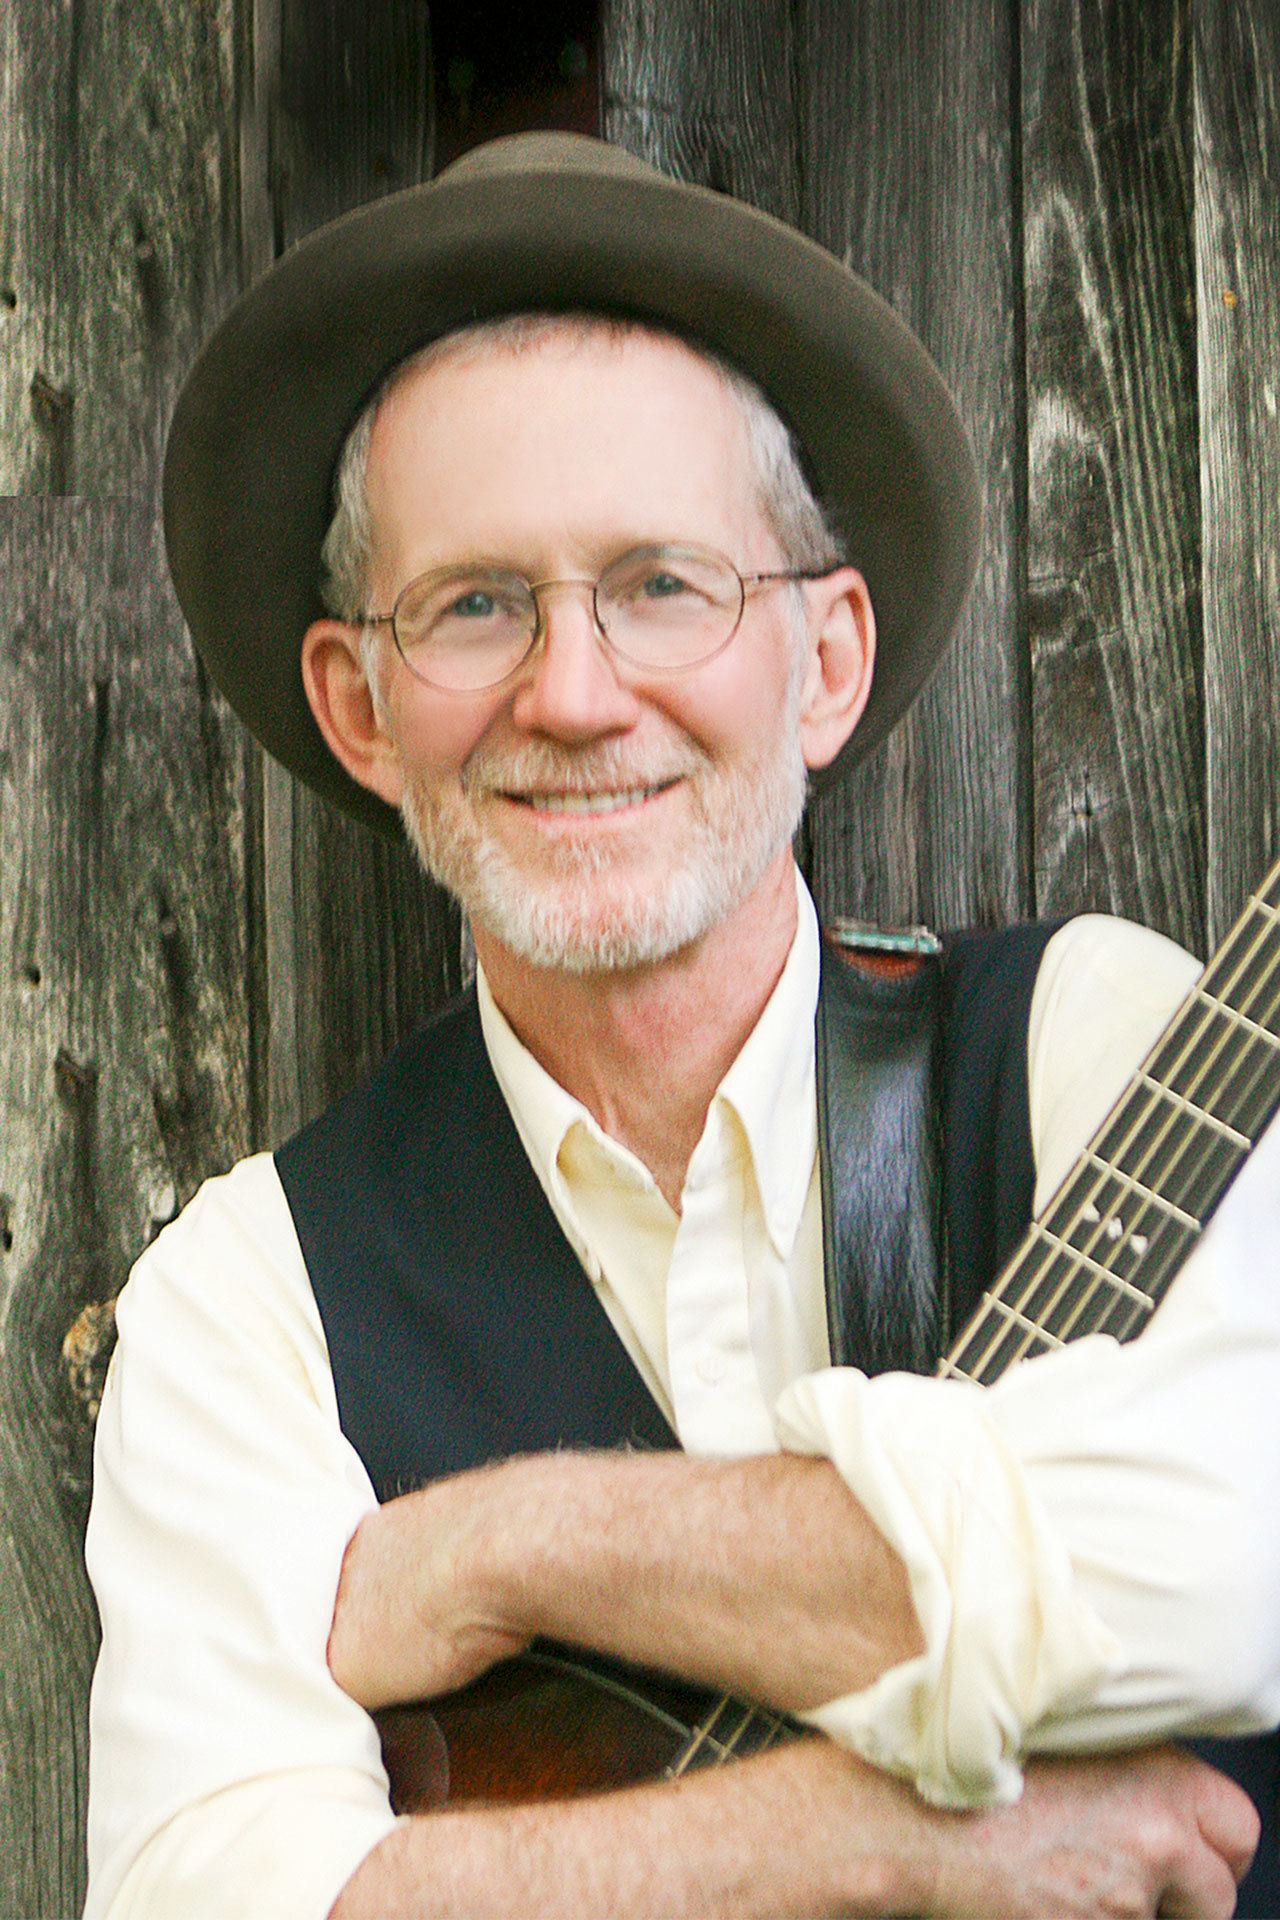 Singer-songwriter Johnsmith will perform tonight at Fort Worden.